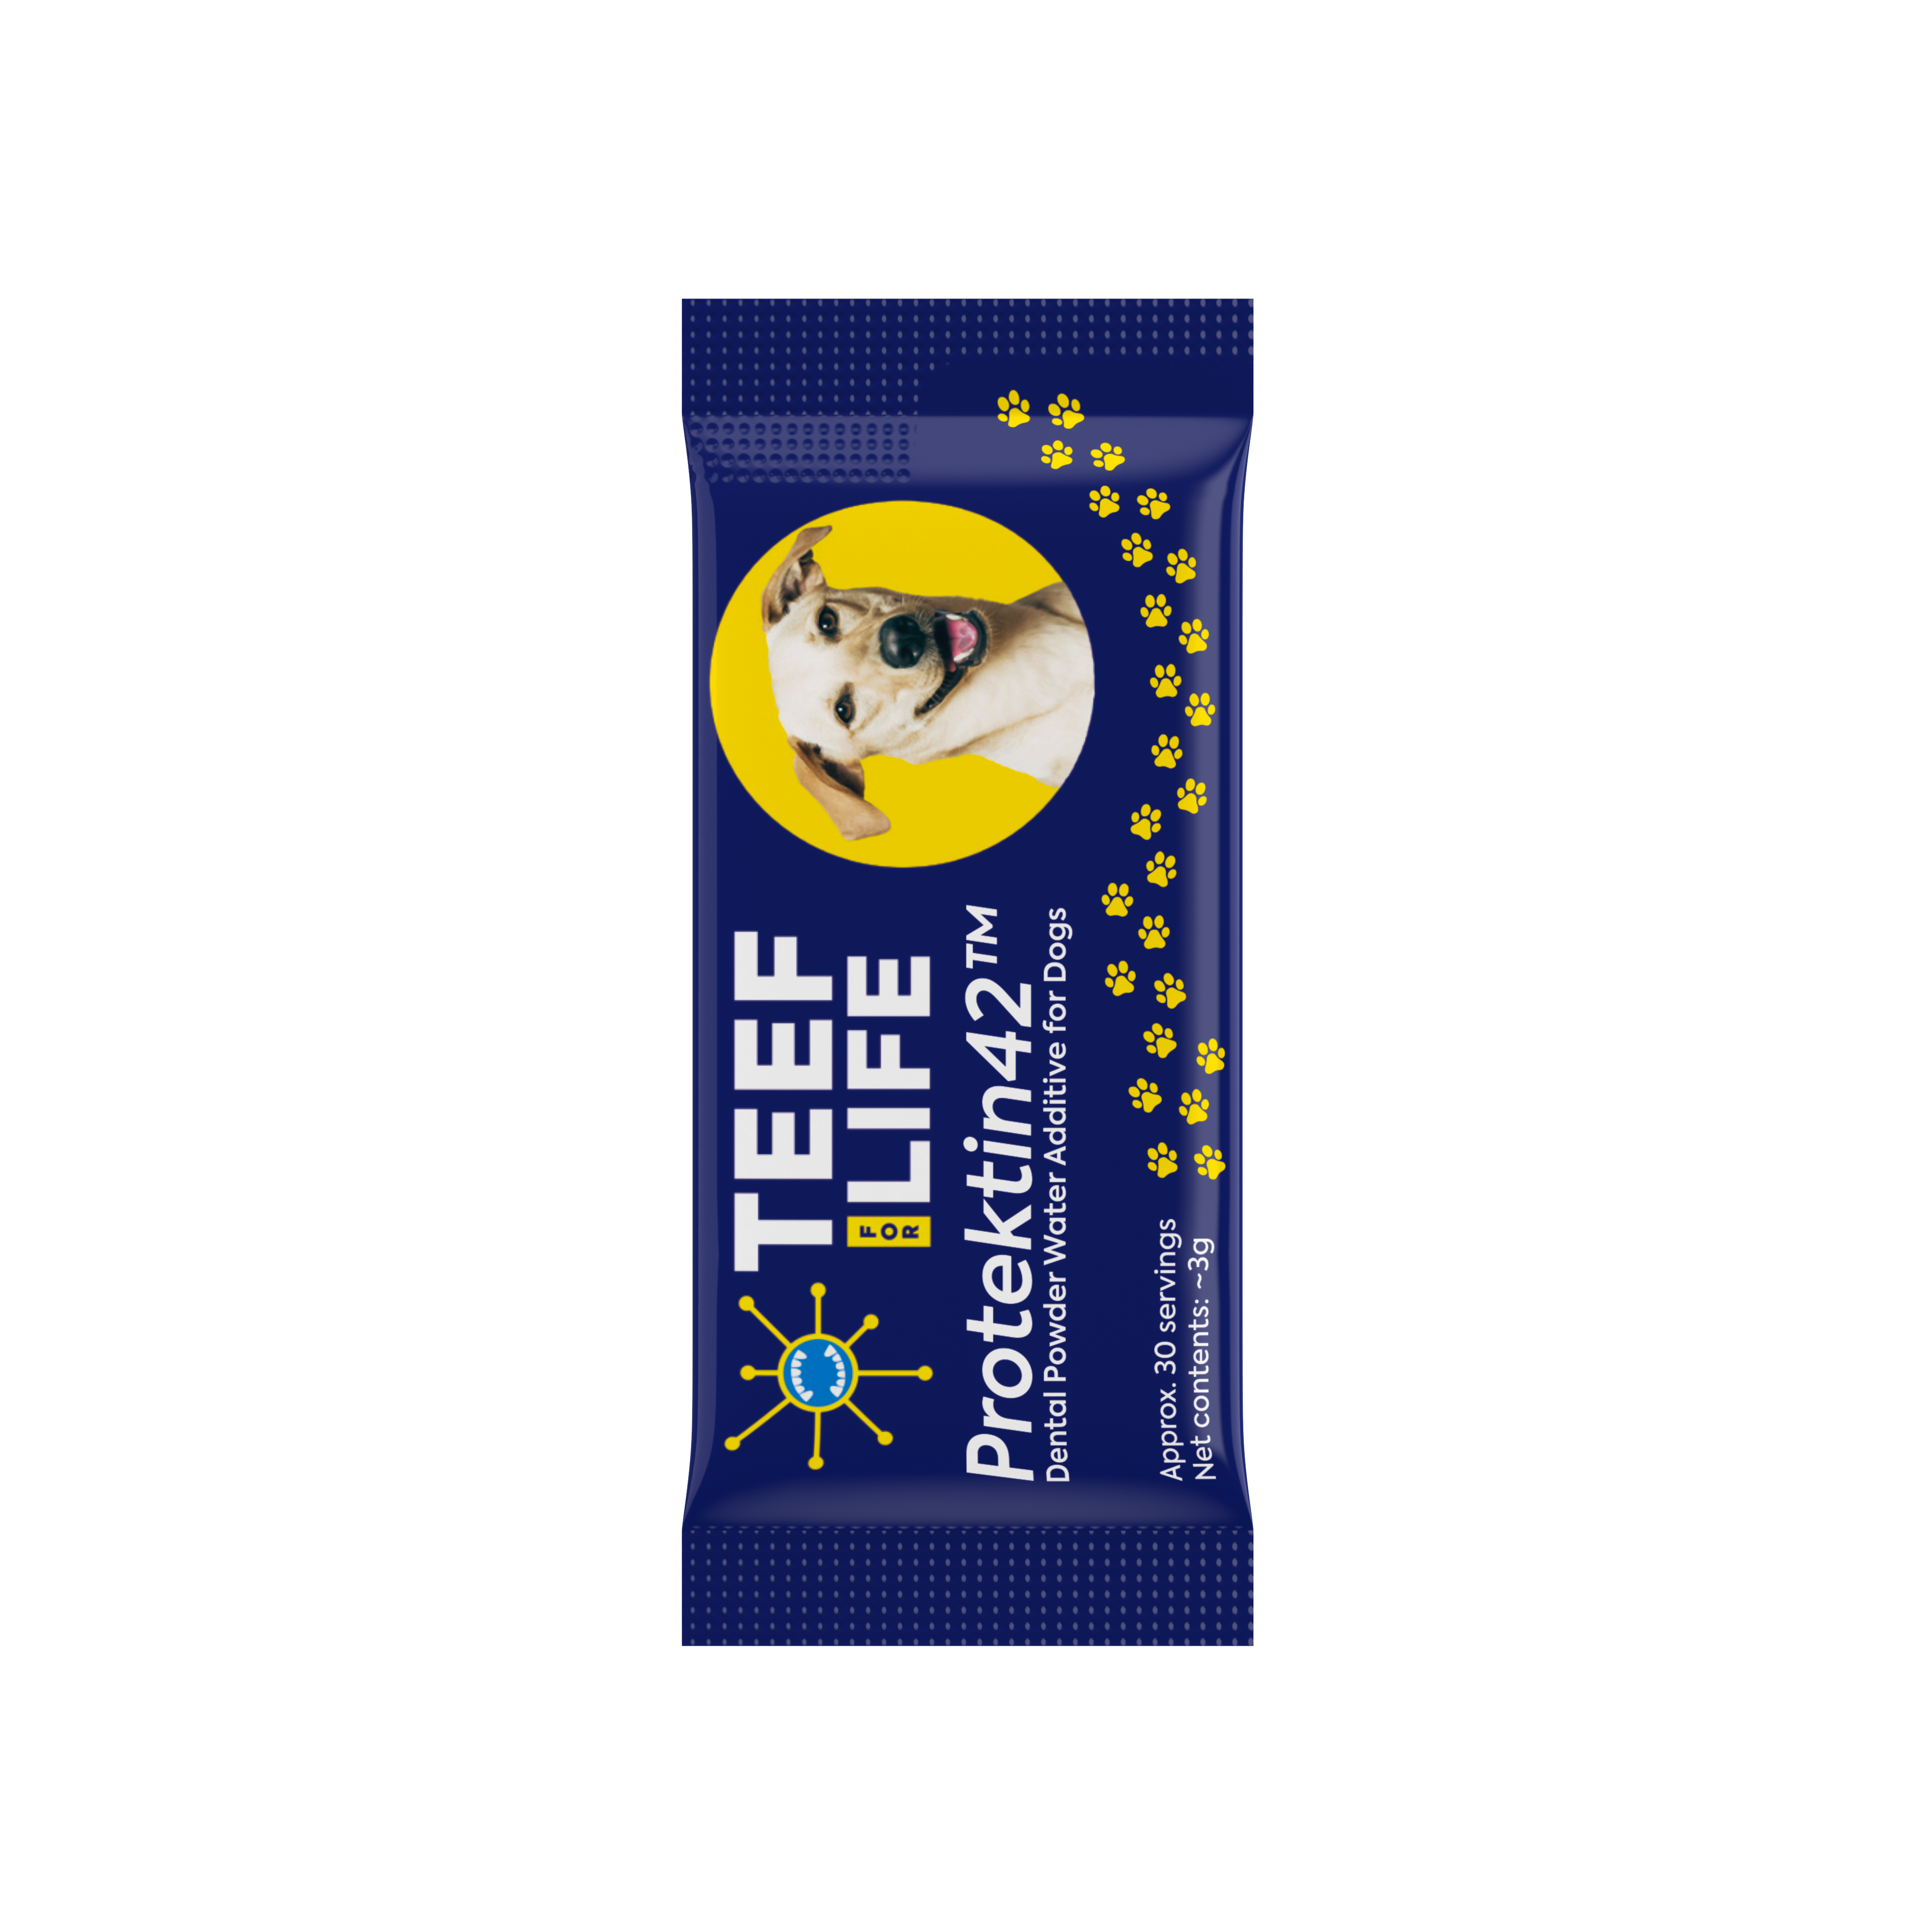 Refill Powder Packet: TEEF for Life - Protektin42™ Prebiotic Dental Powder for Dogs